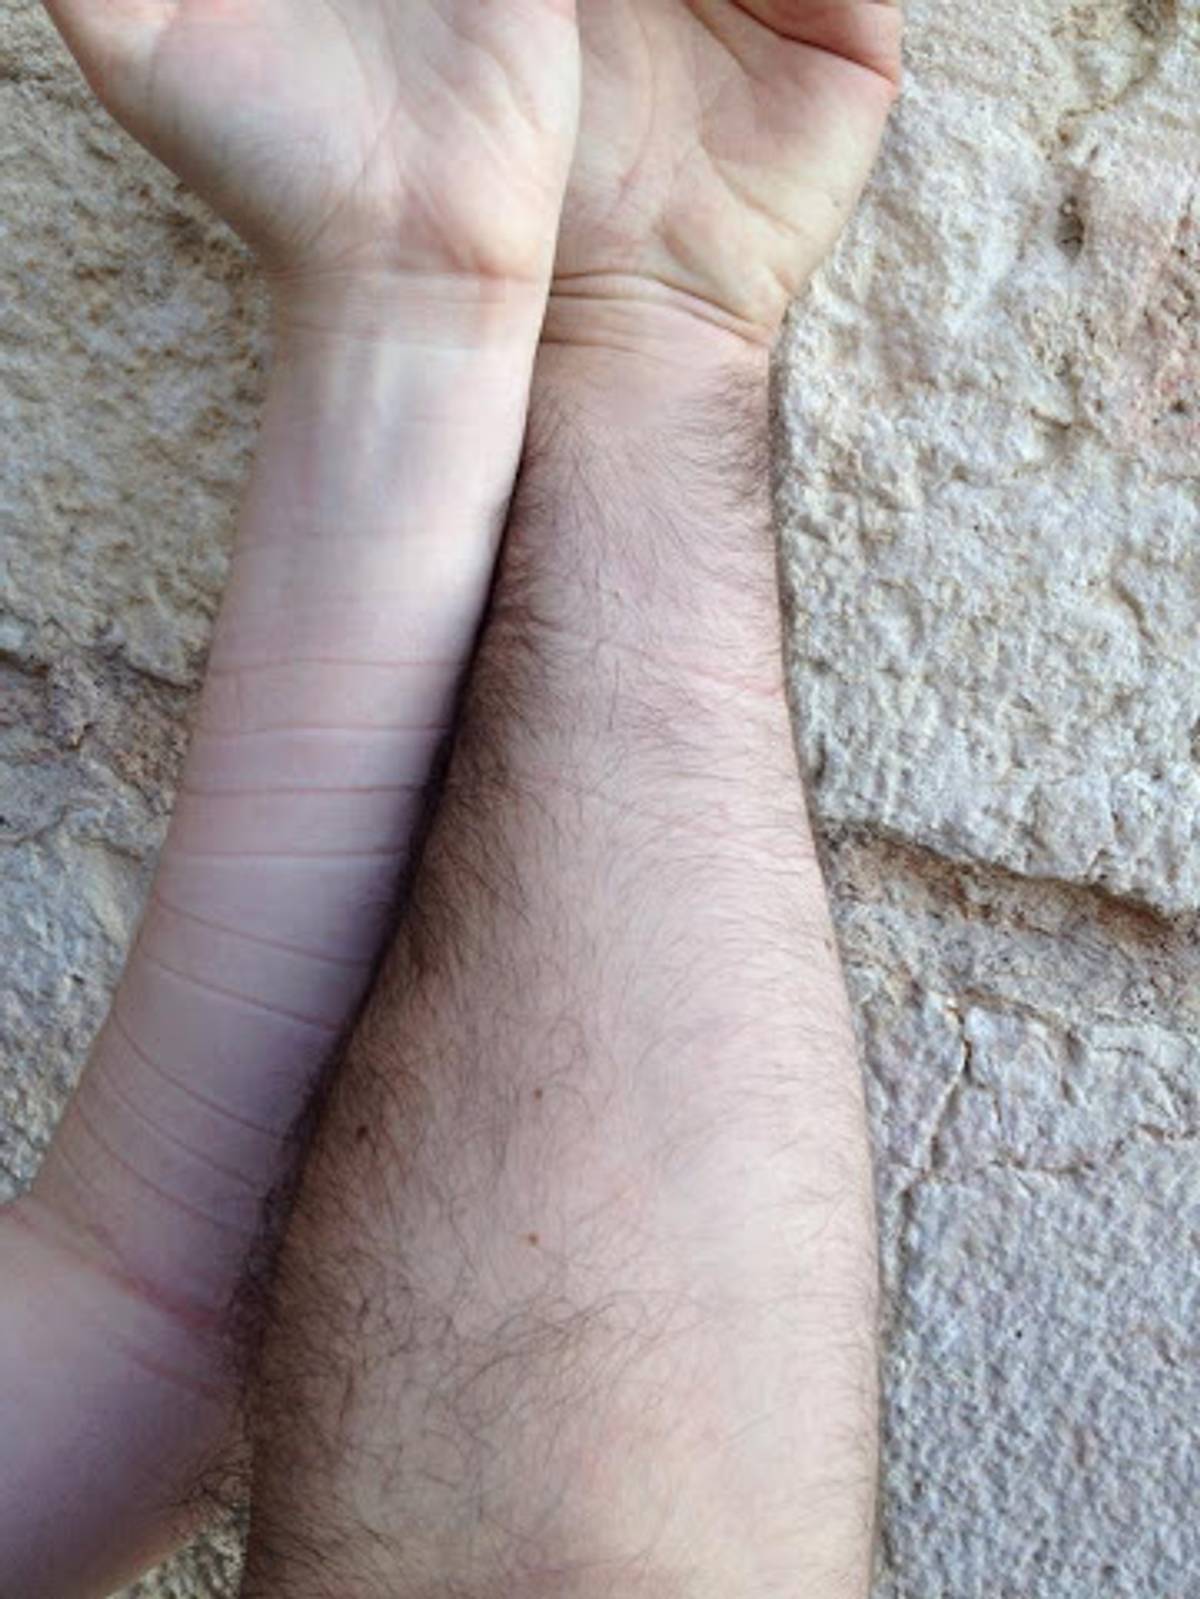 The author and her husband’s arms, after laying tefillin together at Robinson’s Arch, the egalitarian section behind the Kotel in 2014. (Image: Michael Spitzer-Rubenstein)